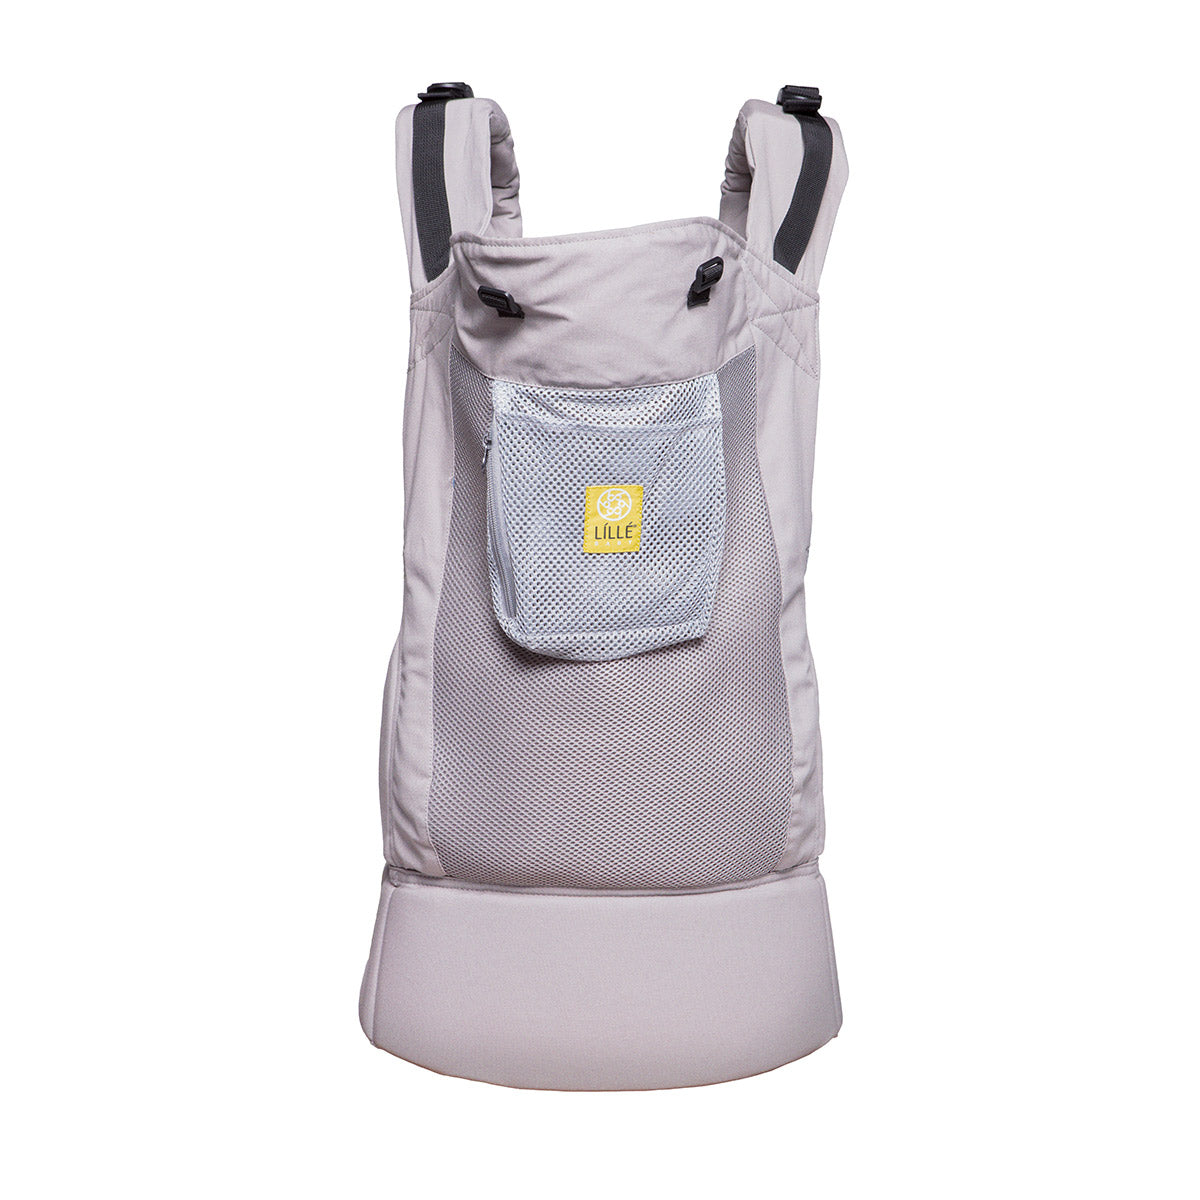 lillebaby carryon airflow baby carrier in mist